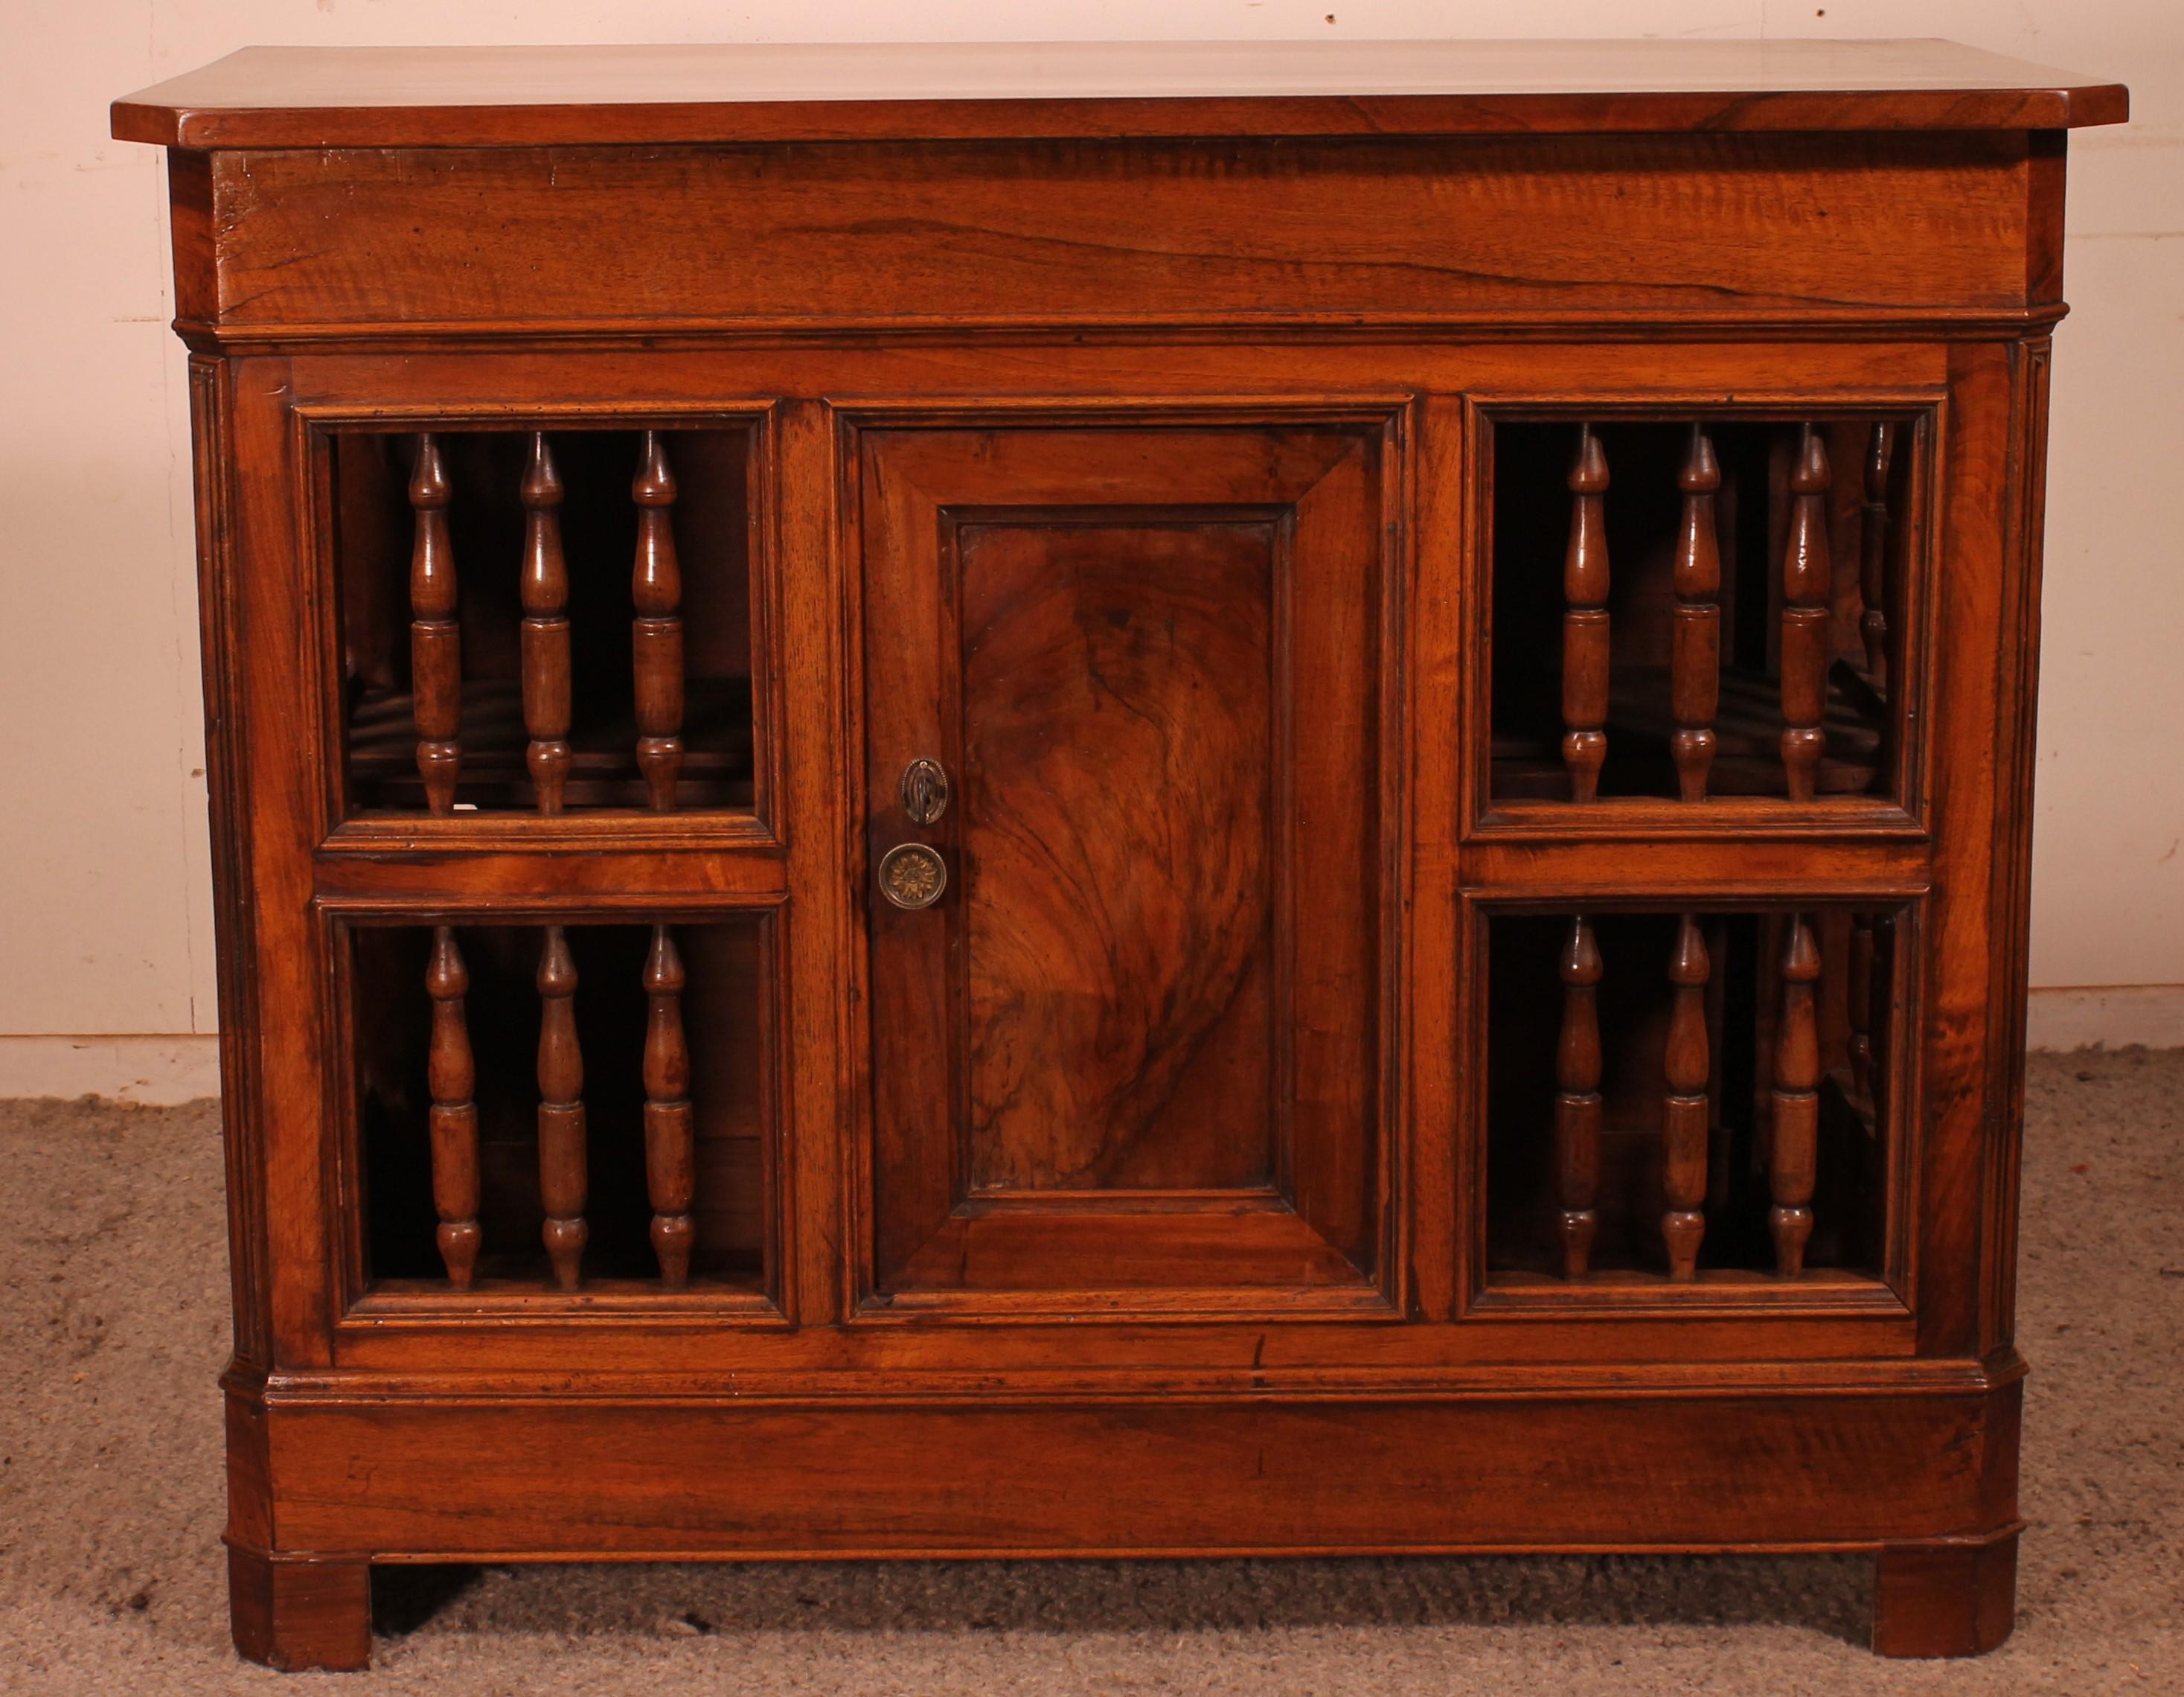 Superb and rare walnut panetière from the beginning of the 19th century
This piece of furniture were used in the past to store the bread in the south of France. Provence region

Very beautiful, unusual model which is larger than usual. It has a